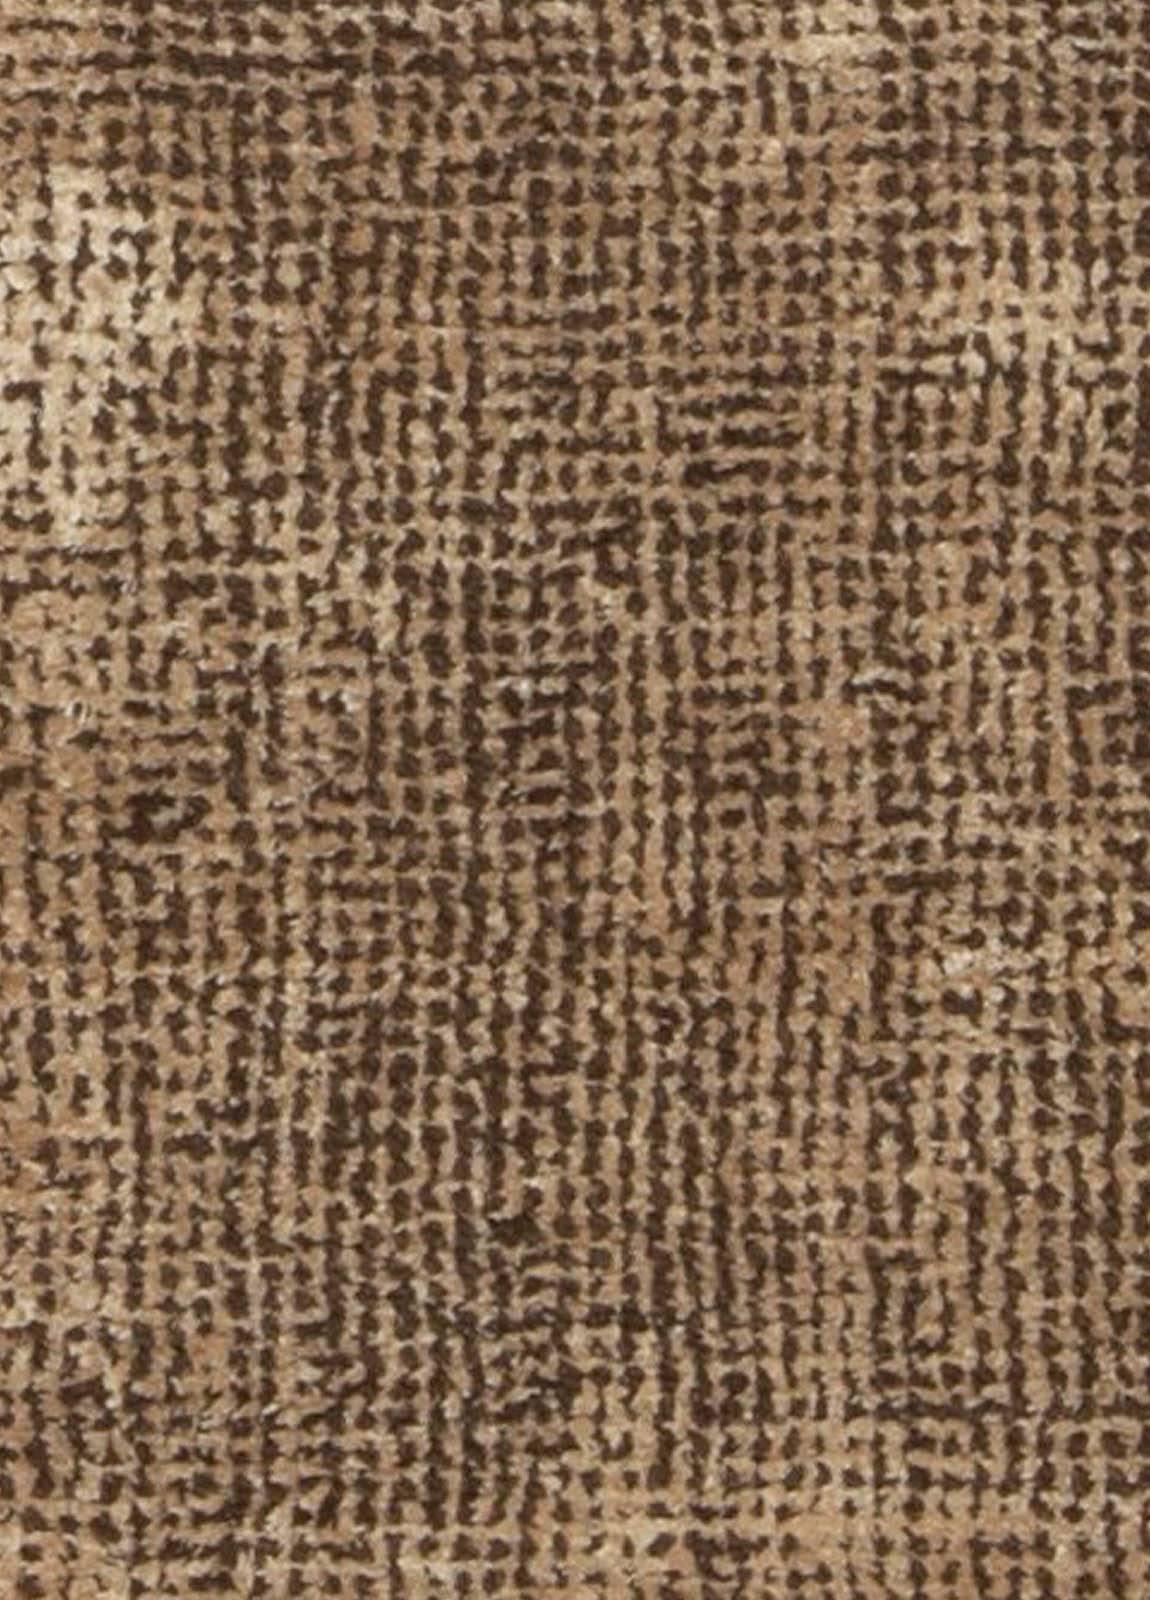 Modern Asbury Cocoa hand knotted wool rug by Doris Leslie Blau.
Size: 2'10